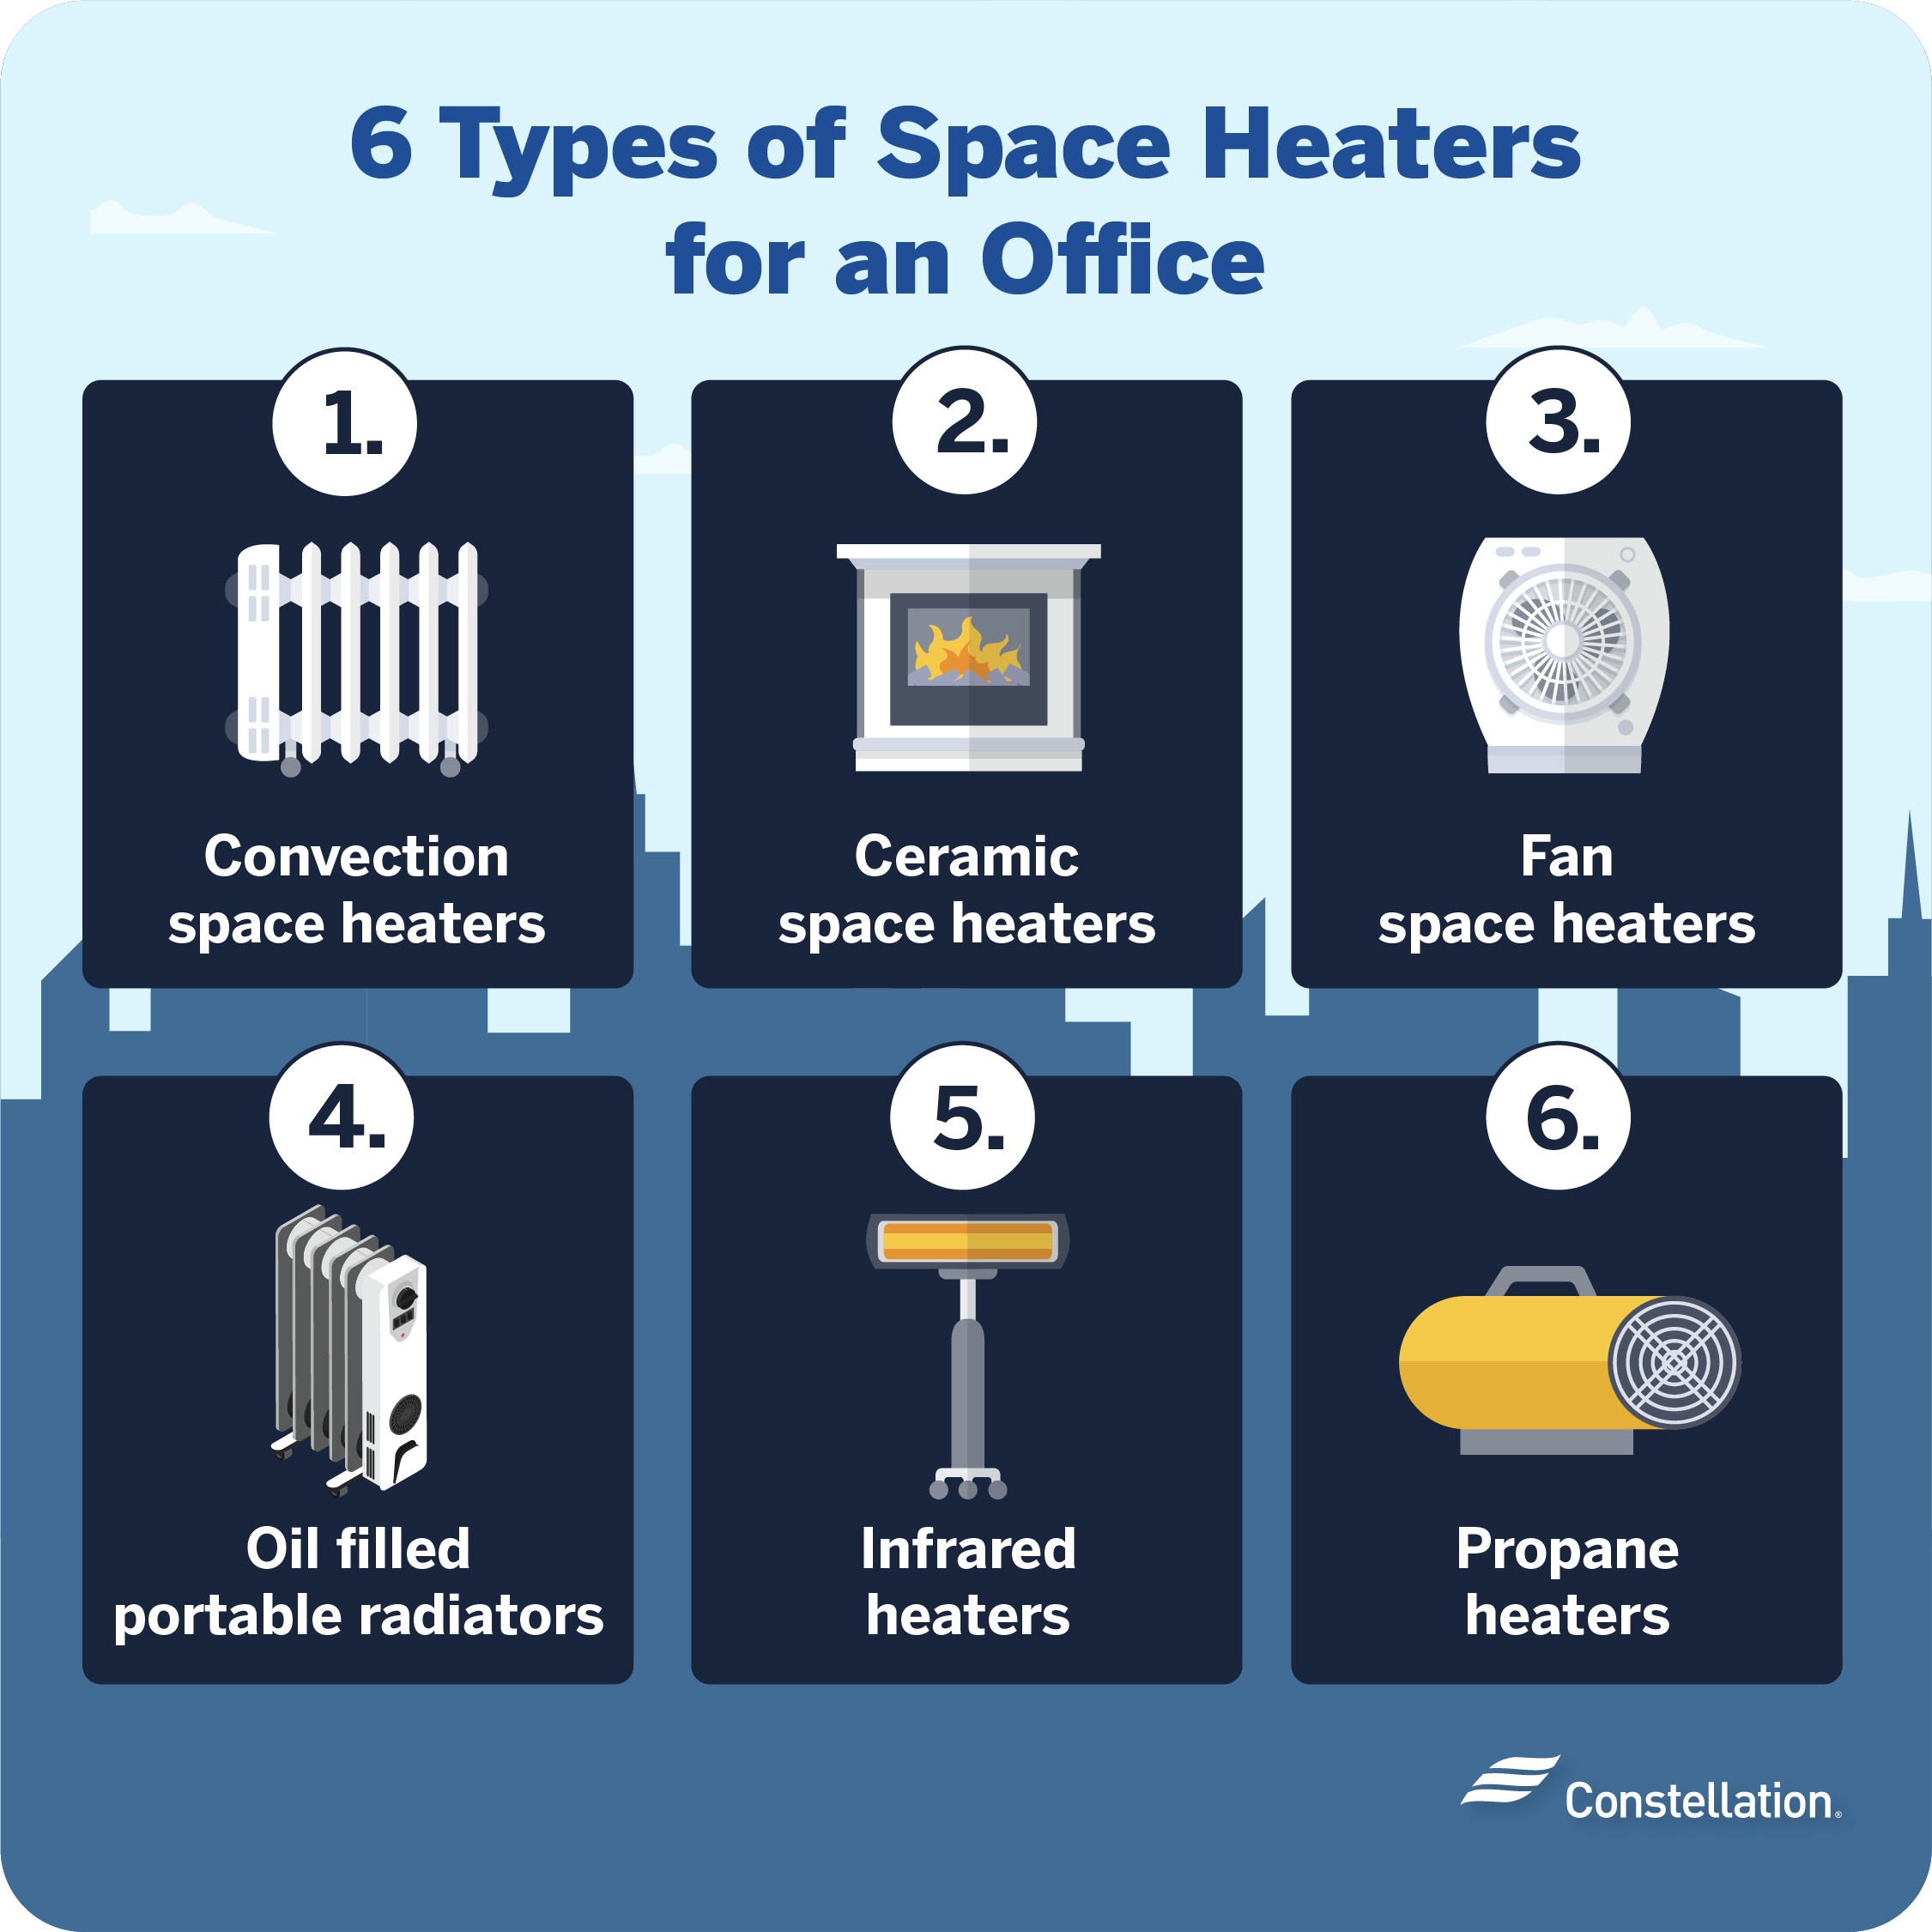 These Are the 3 Safest Space Heaters, According to a Licensed